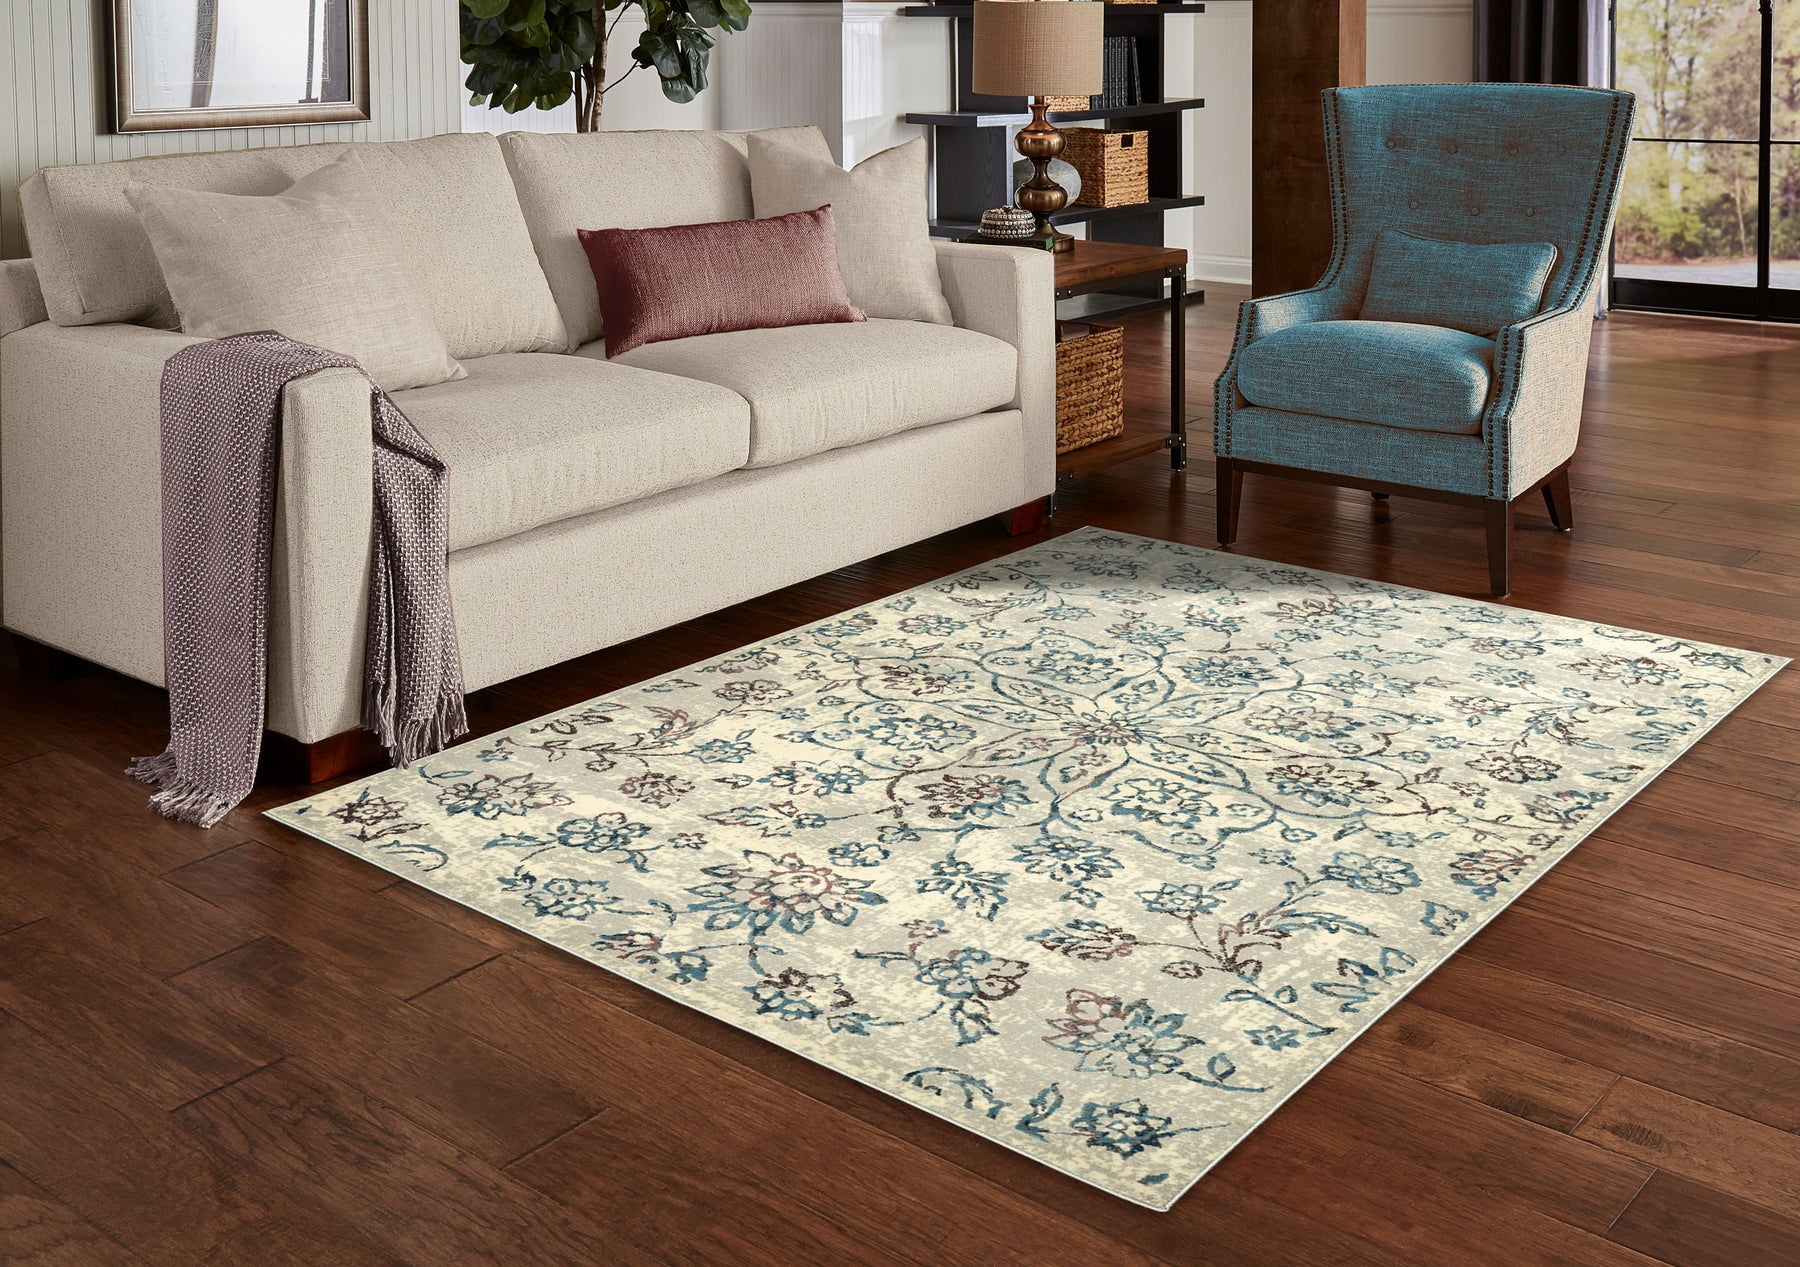 Flatweave, Low Pile or High Pile , What Rug Do YOU Need?